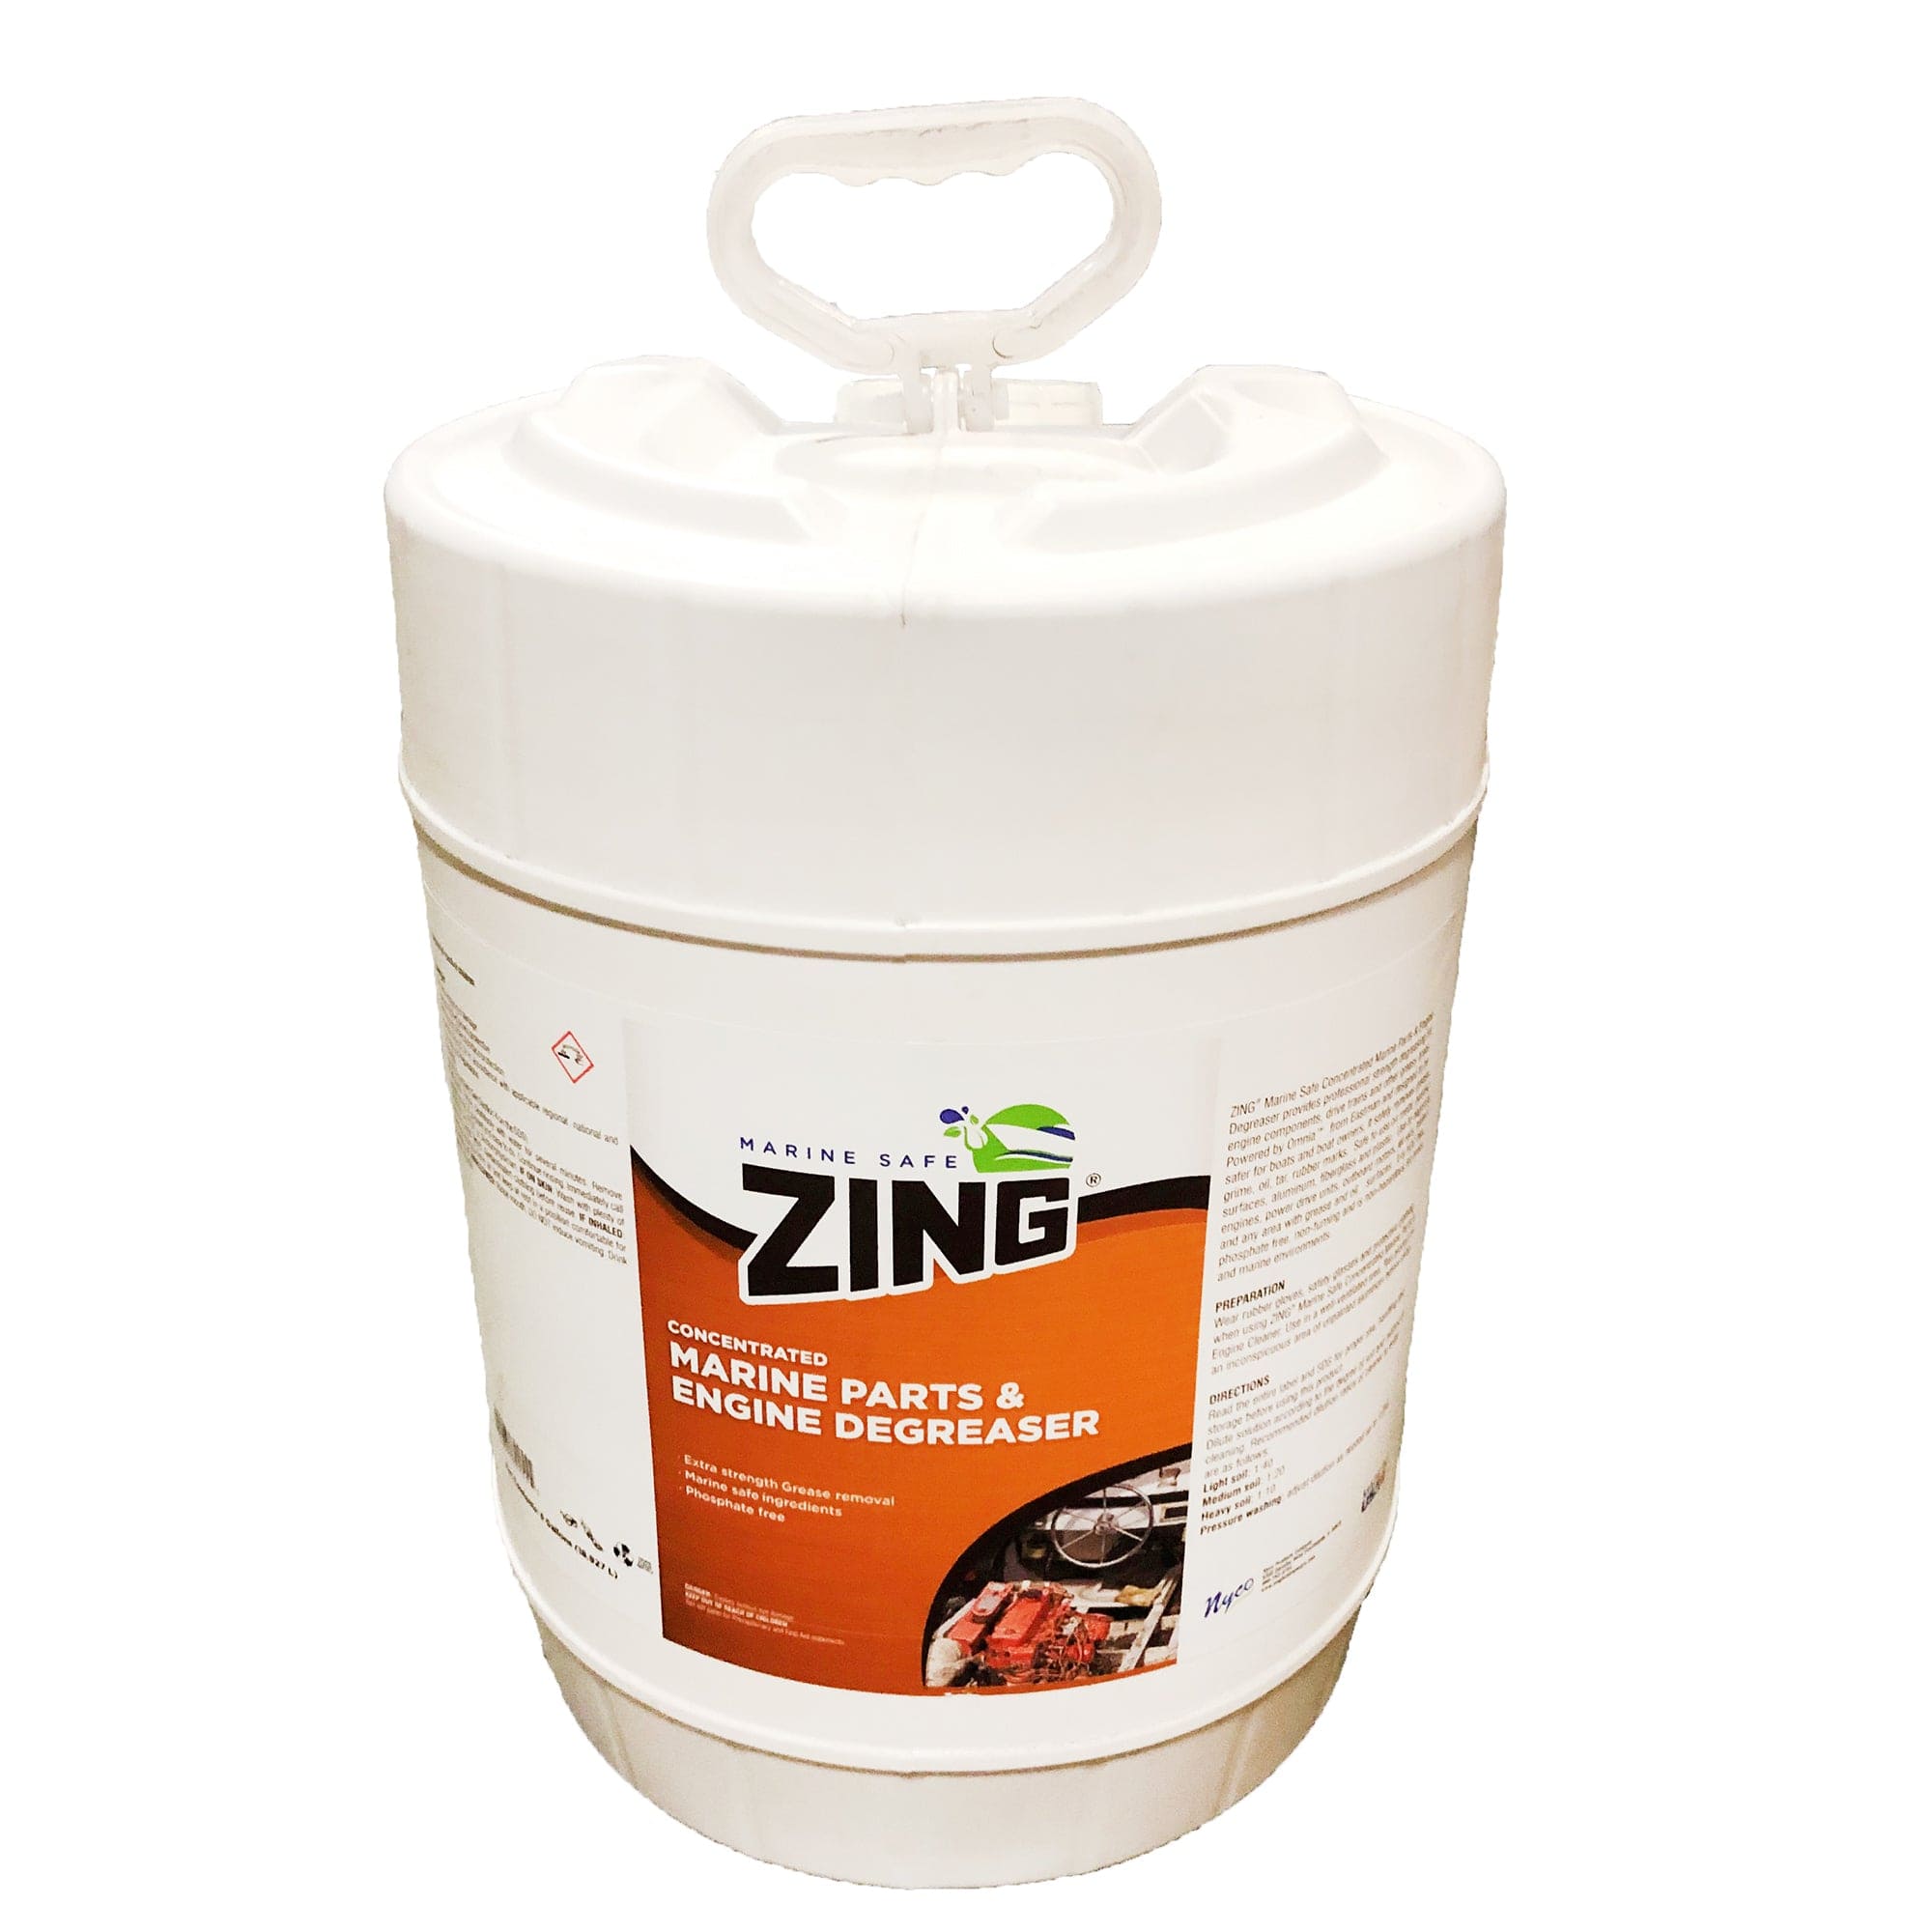 Zing Z392-P5 Concentrated Marine Parts & Engine Degreaser 10502 - 5 Gallon Pail